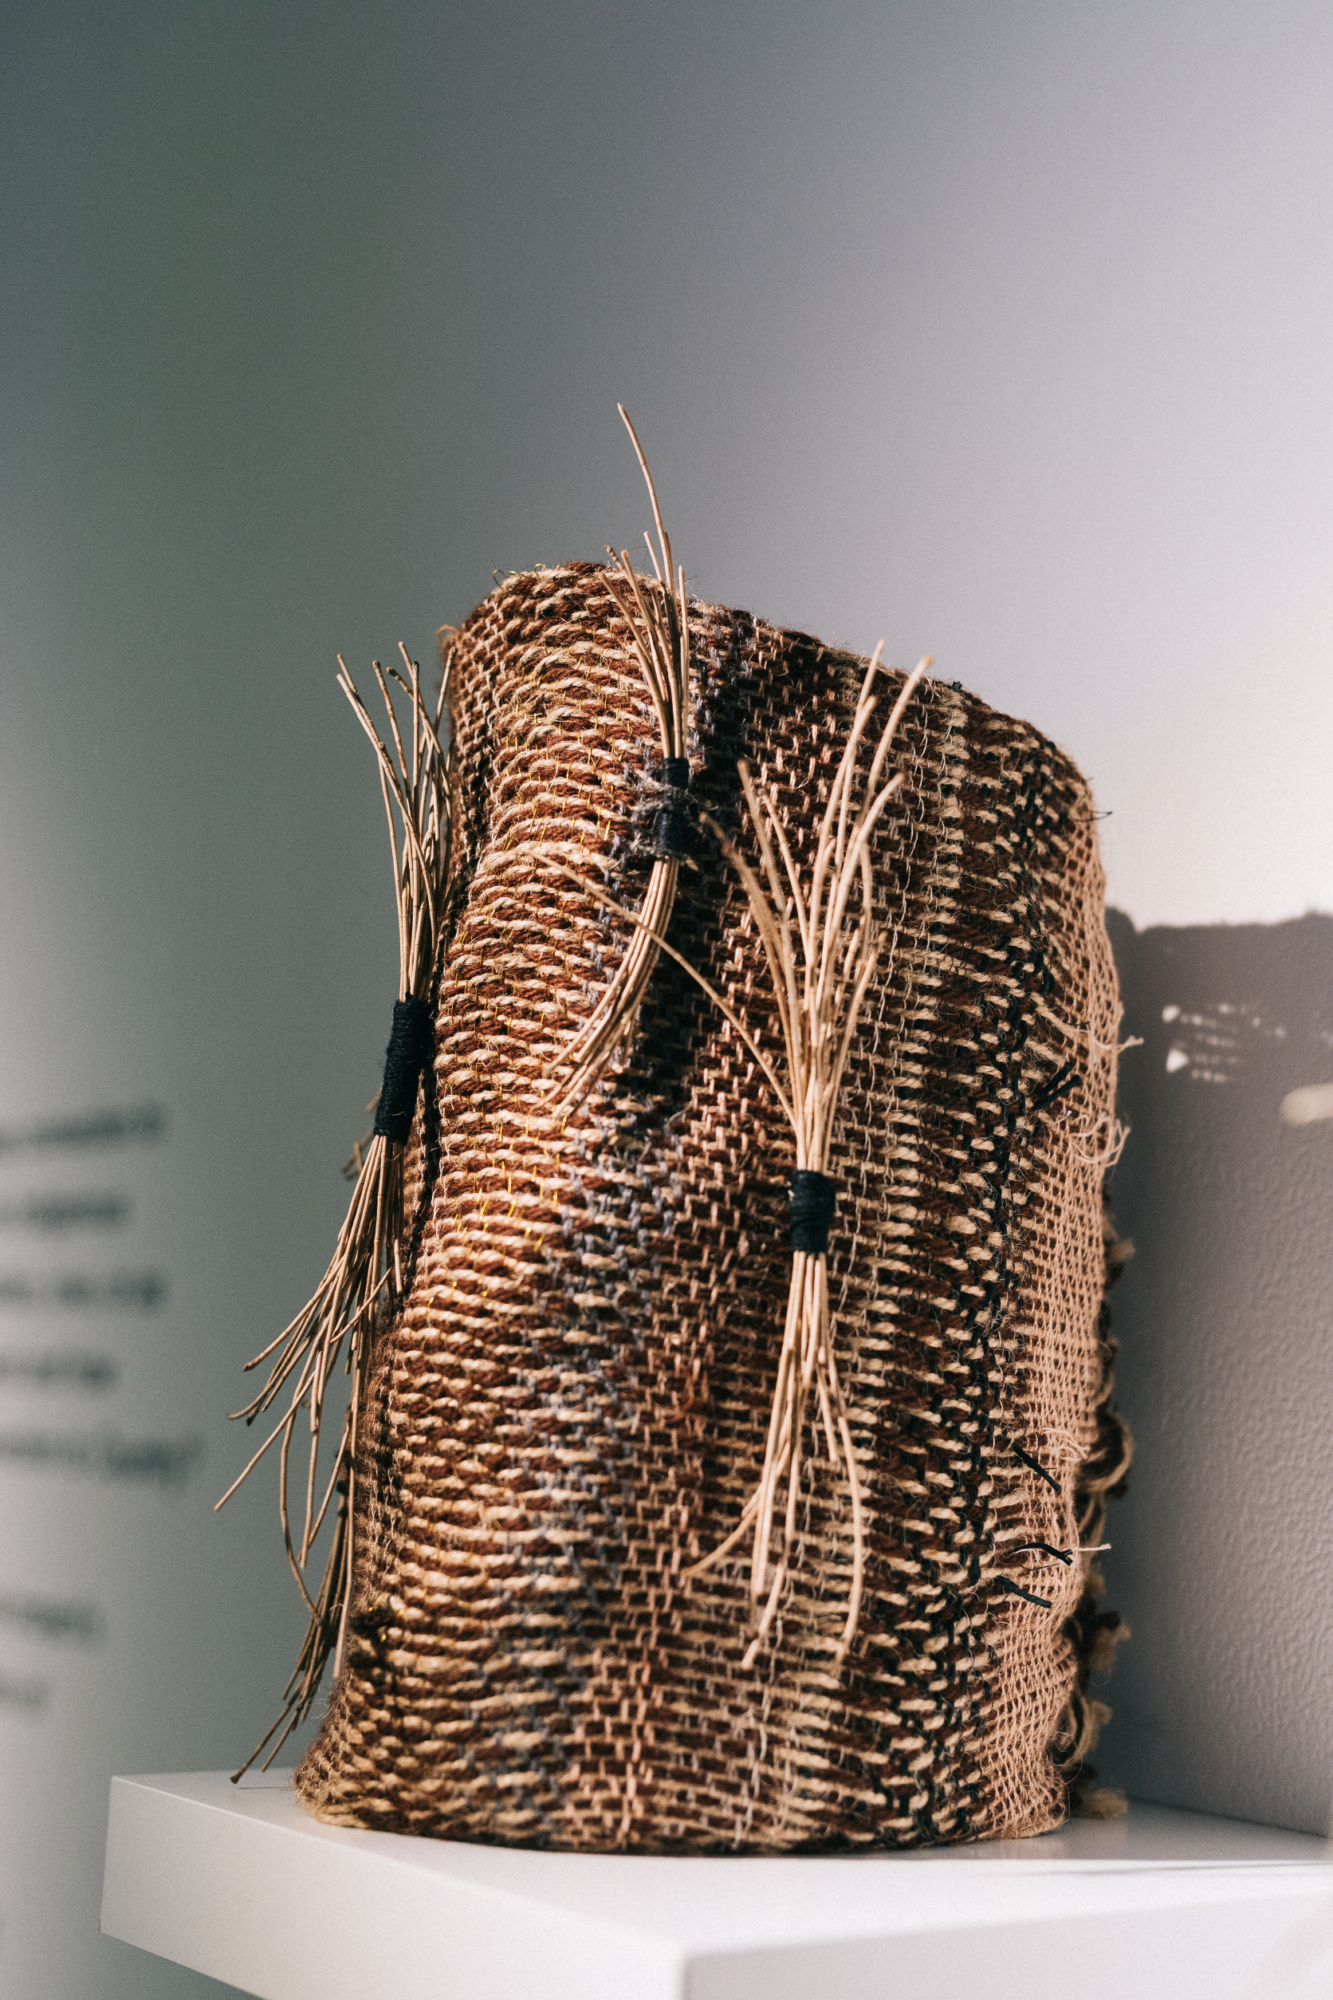 A cylindrical vessel made from jute, recycled wool, reeds, sheoak nettles, presented on a floating white shelf.